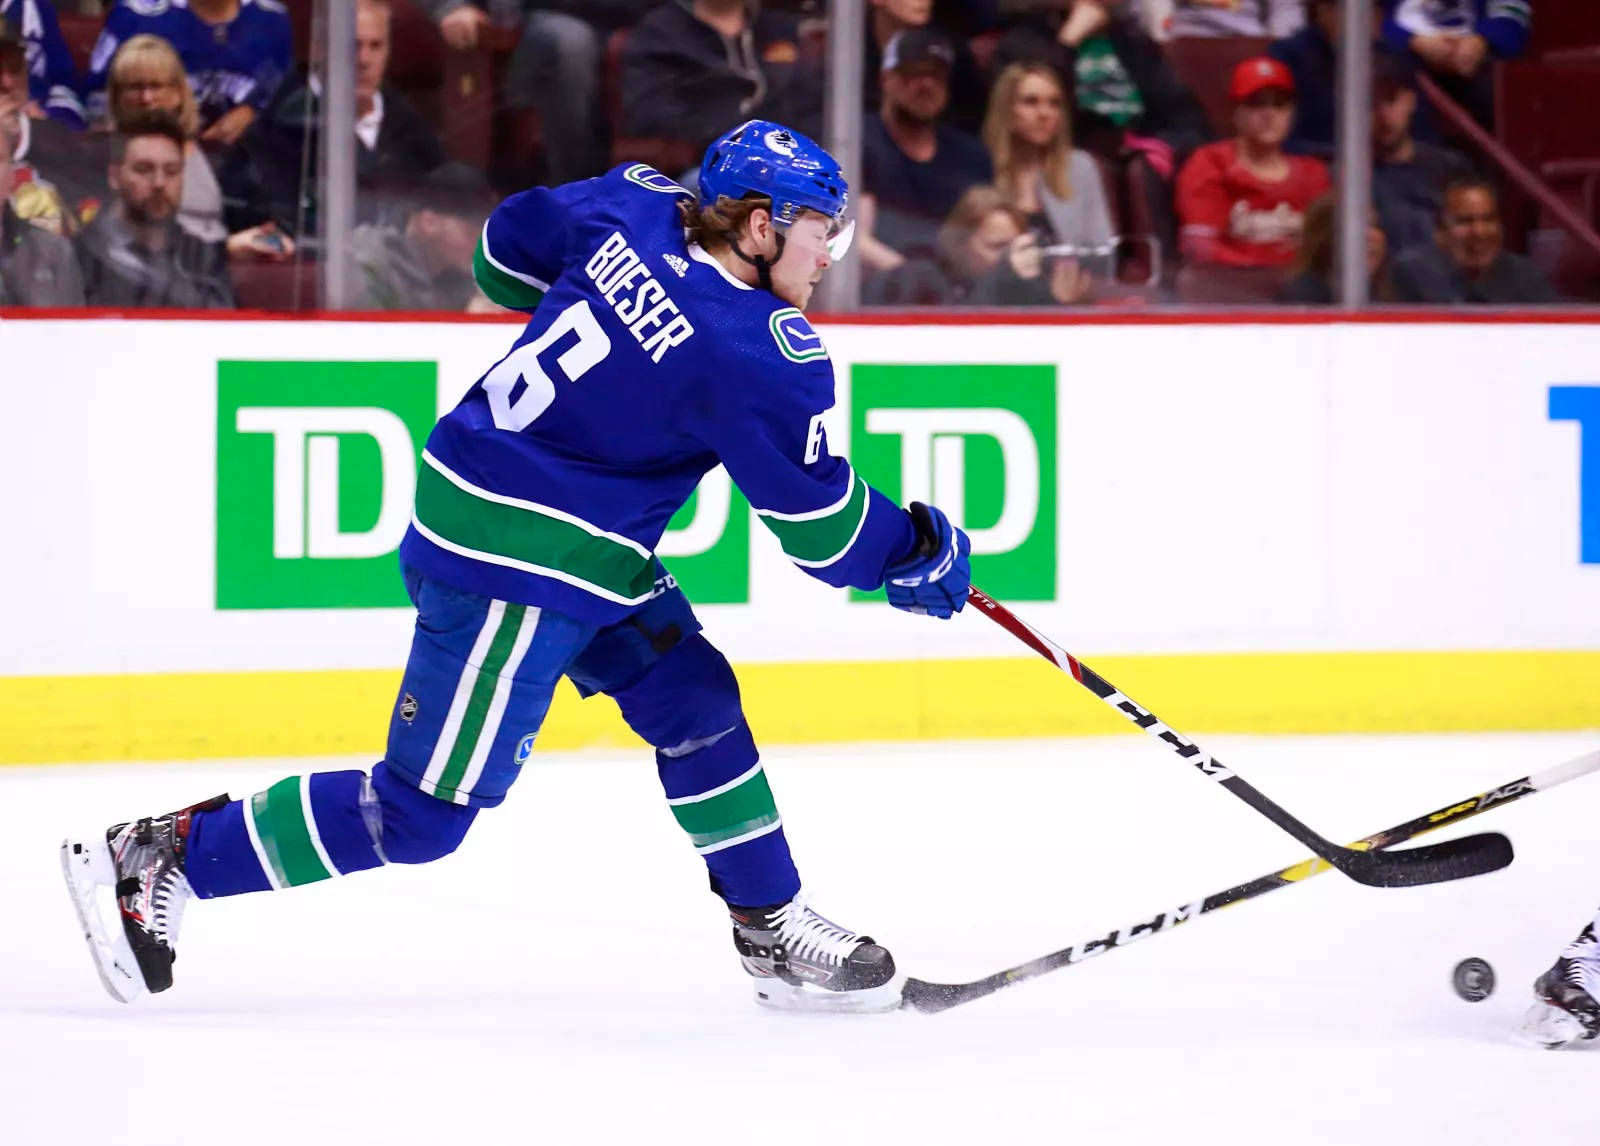 Vancouver Canucks’ Star Player, Brock Boeser, in Action against Calgary Flames Wallpaper